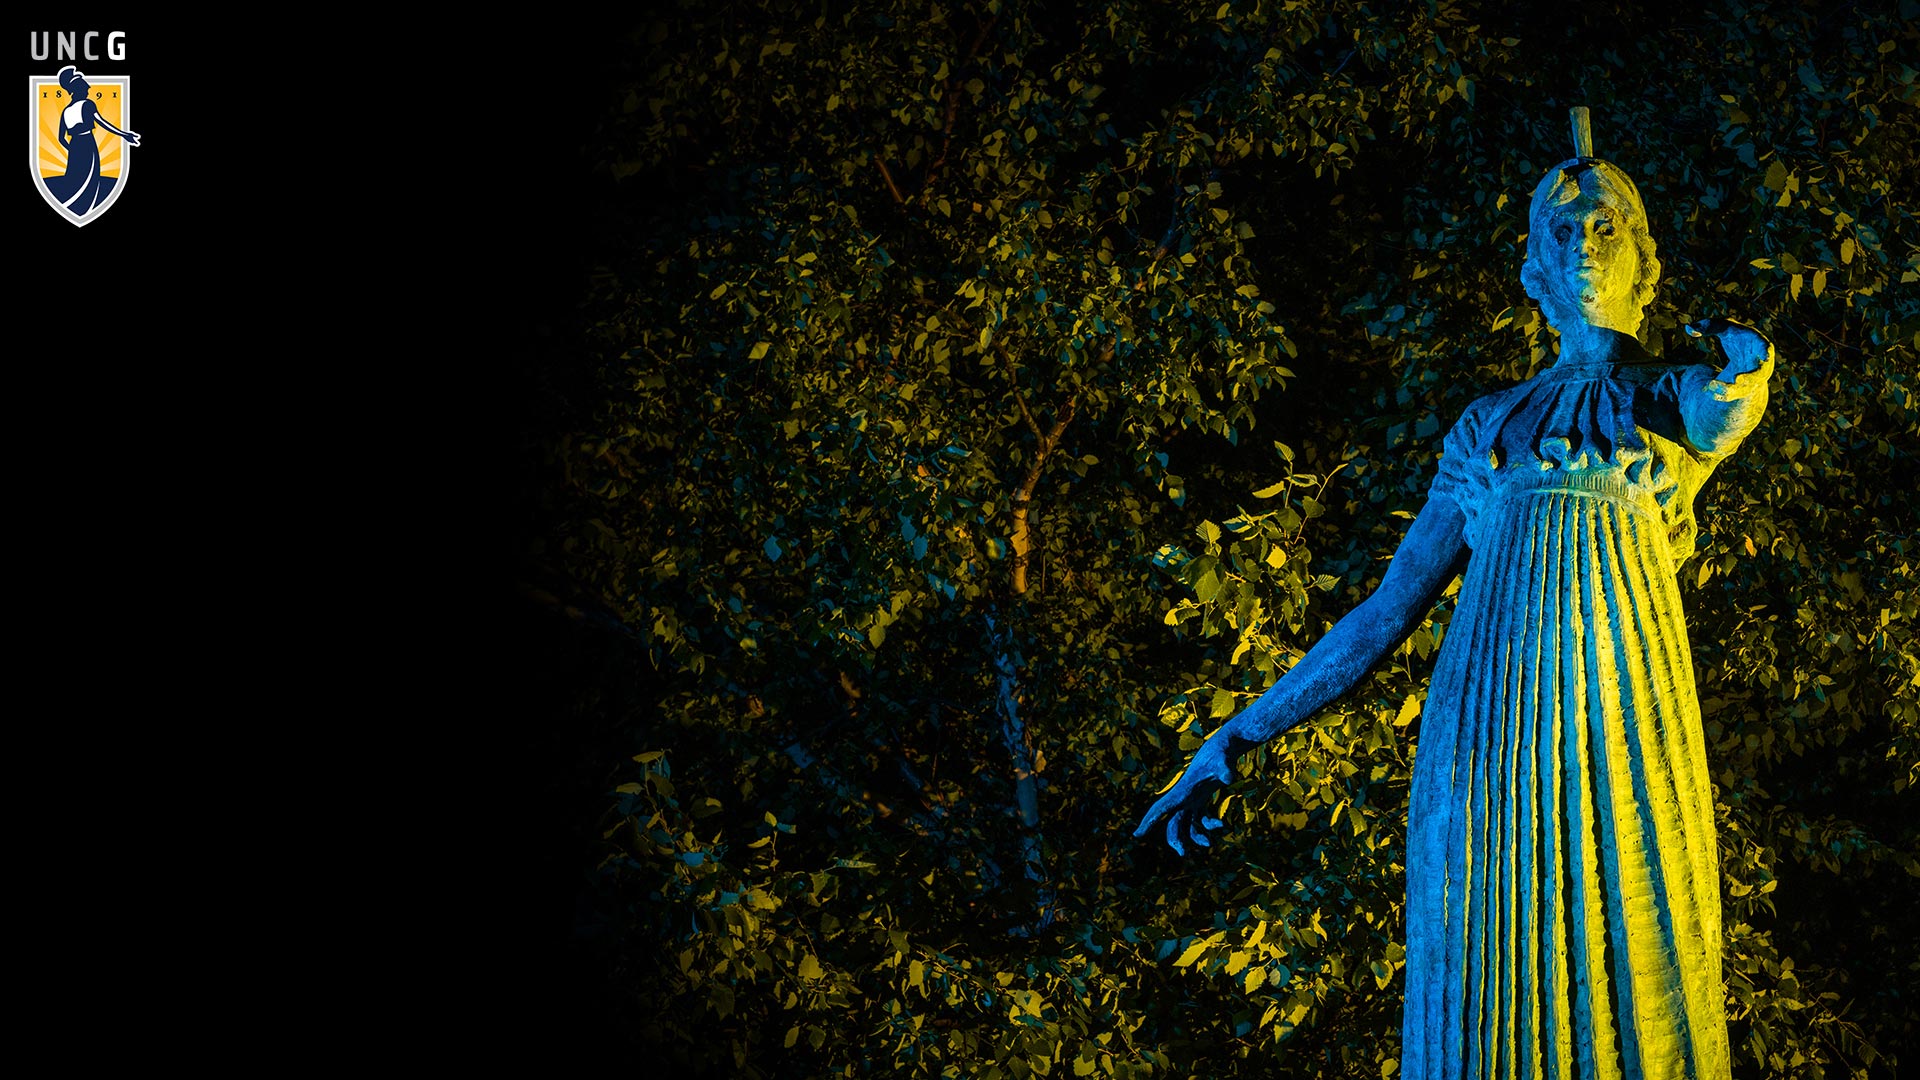 Minerva Statue in front of a tree against the night sky and the UNCG logo in top left corner